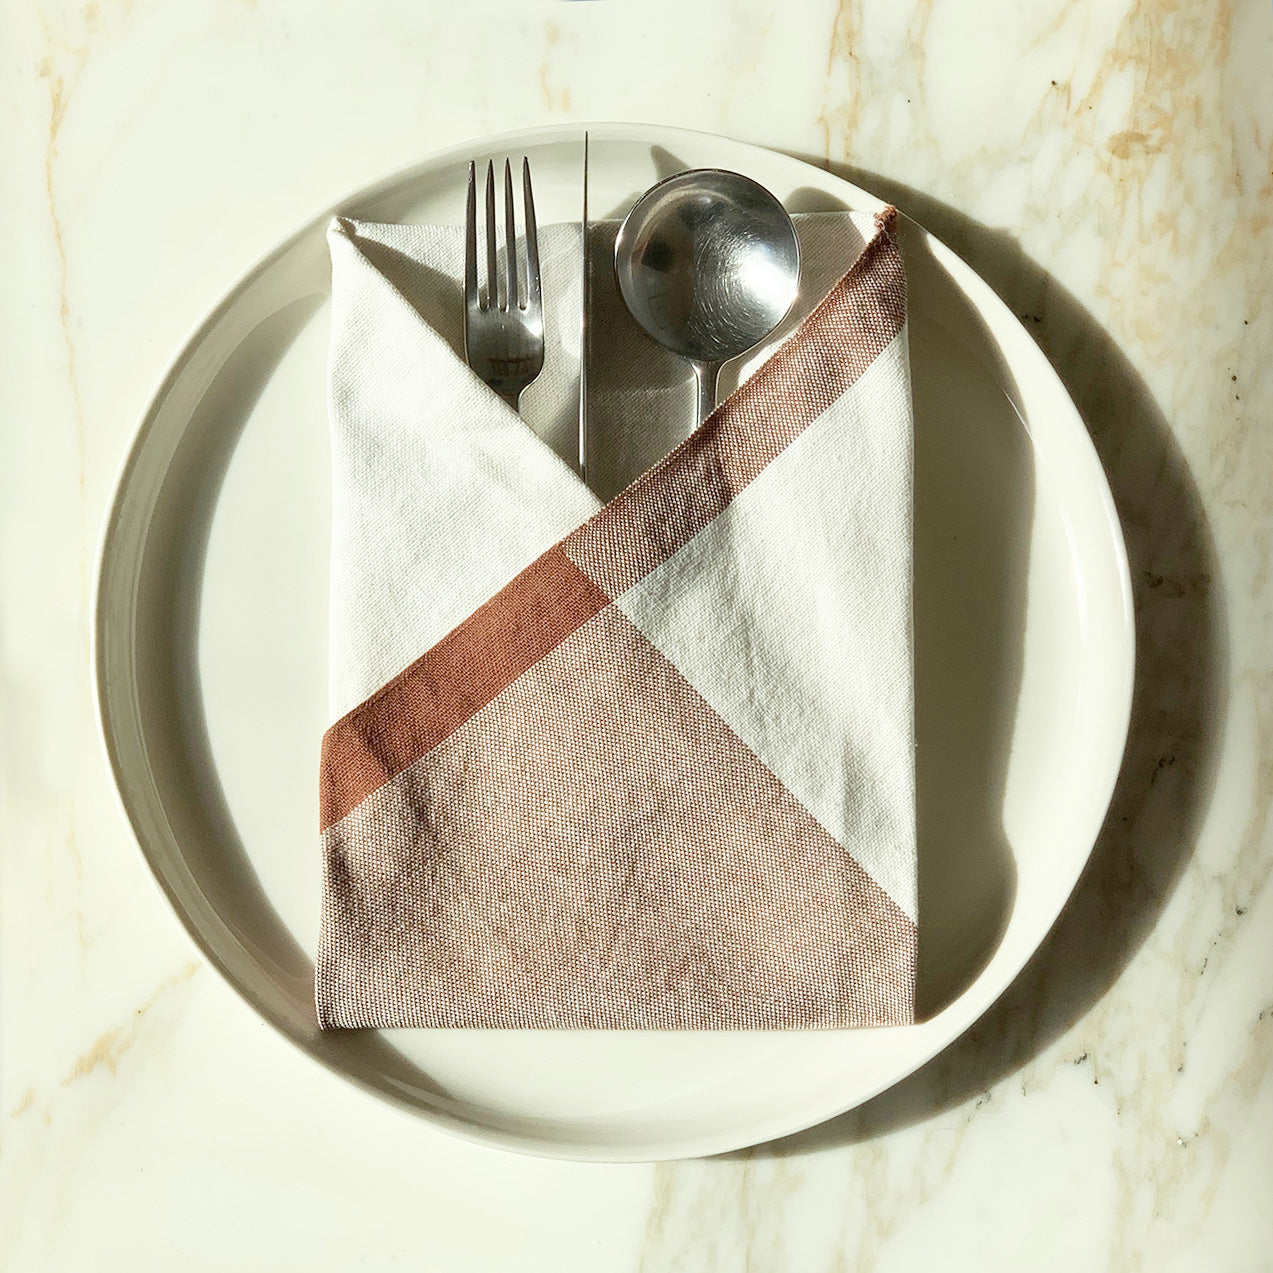 Image of M+A NYC Colorblock Napkin in Kora/Cafe Con Leche folded on a cream plate with a set of flatware tucked inside.